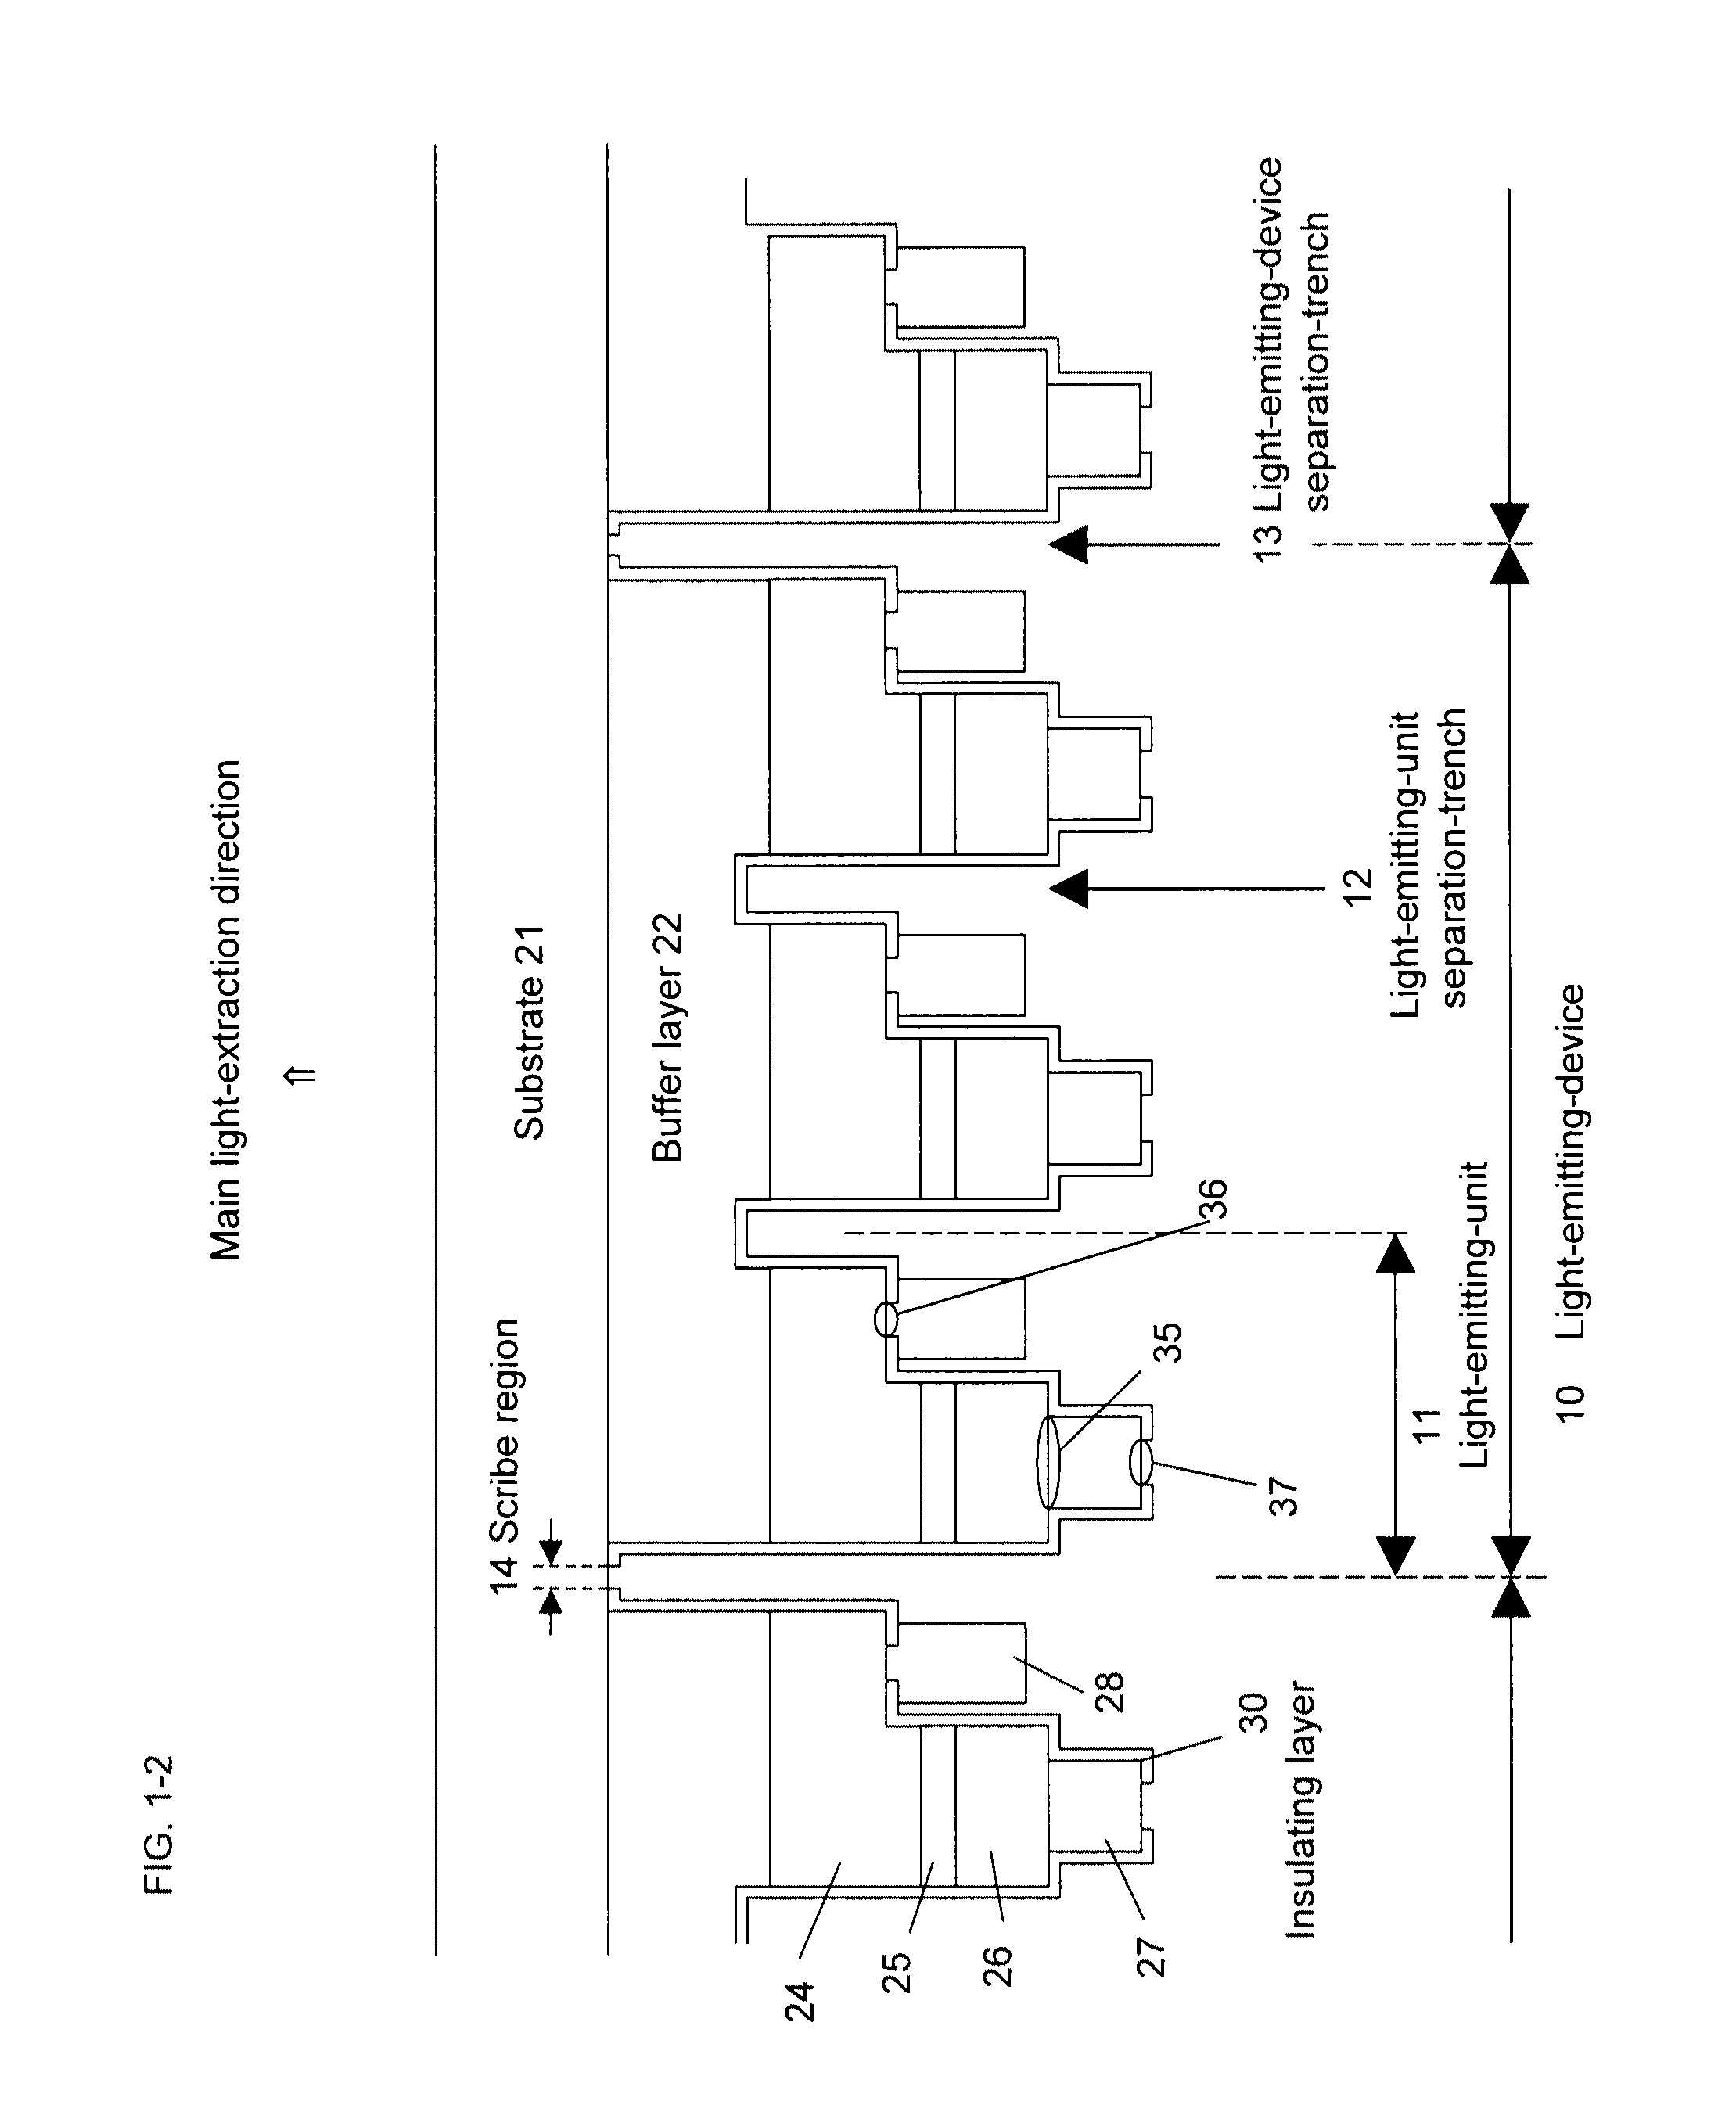 Integrated semiconductor light emitting device and method for manufacturing same